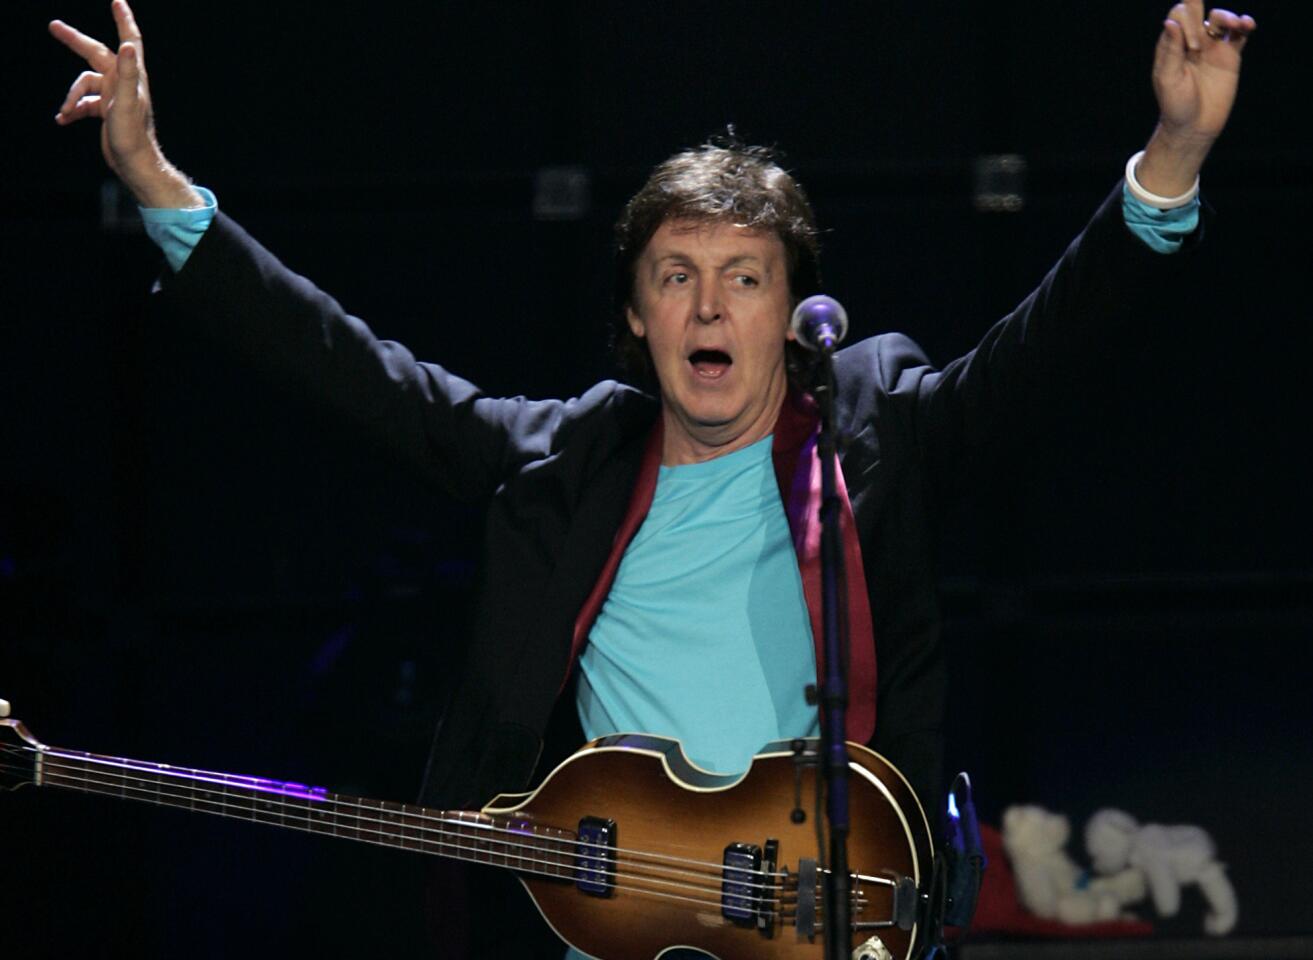 Paul McCartney is one of the bestselling and most-honored musicians of all time. Take a look back at McCartney's storied career. Pictured: McCartney performing in Anaheim, Calif. on November 11, 2005.